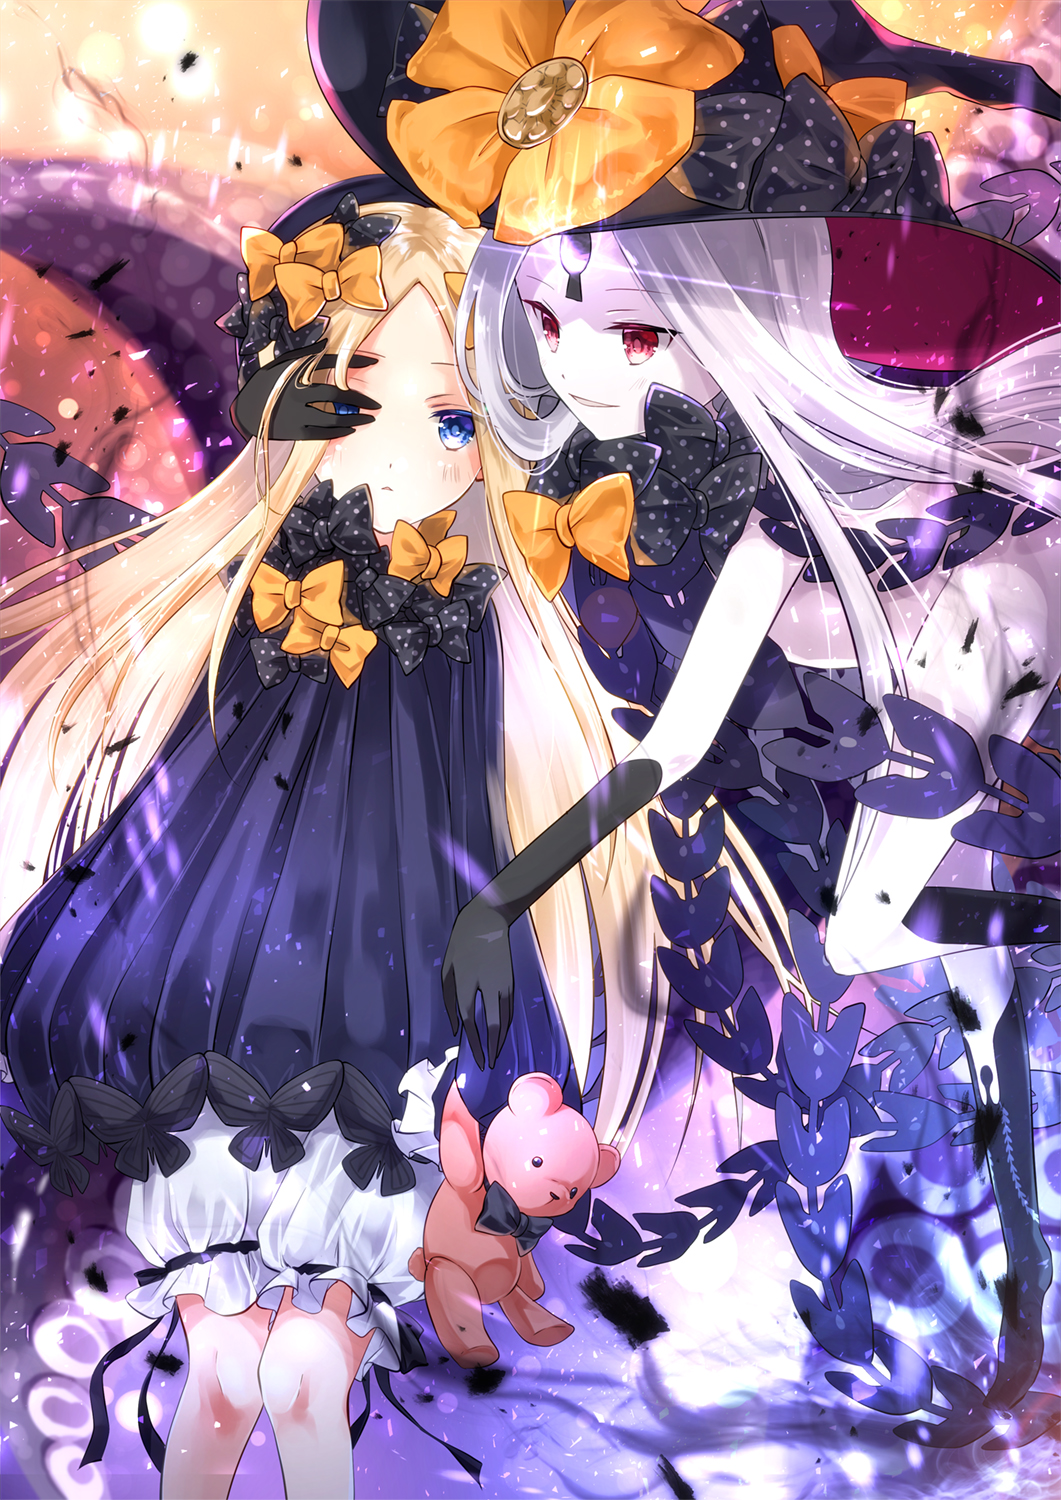 2girls abigail_williams_(fate/grand_order) bangs black_bow black_dress black_gloves black_hat black_legwear black_panties blonde_hair bloomers blue_eyes blush bow butterfly commentary_request dress dual_persona elbow_gloves eye_contact fate/grand_order fate_(series) gloves glowing hair_bow hand_on_another's_face hat hat_bow highres holding holding_stuffed_animal iroha_(shiki) kneehighs long_hair long_sleeves looking_at_another looking_at_viewer multiple_girls orange_bow pale_skin panties parted_bangs parted_lips polka_dot polka_dot_bow red_eyes revealing_clothes sleeves_past_wrists stuffed_animal stuffed_toy teddy_bear tentacle topless underwear very_long_hair white_bloomers white_hair witch_hat